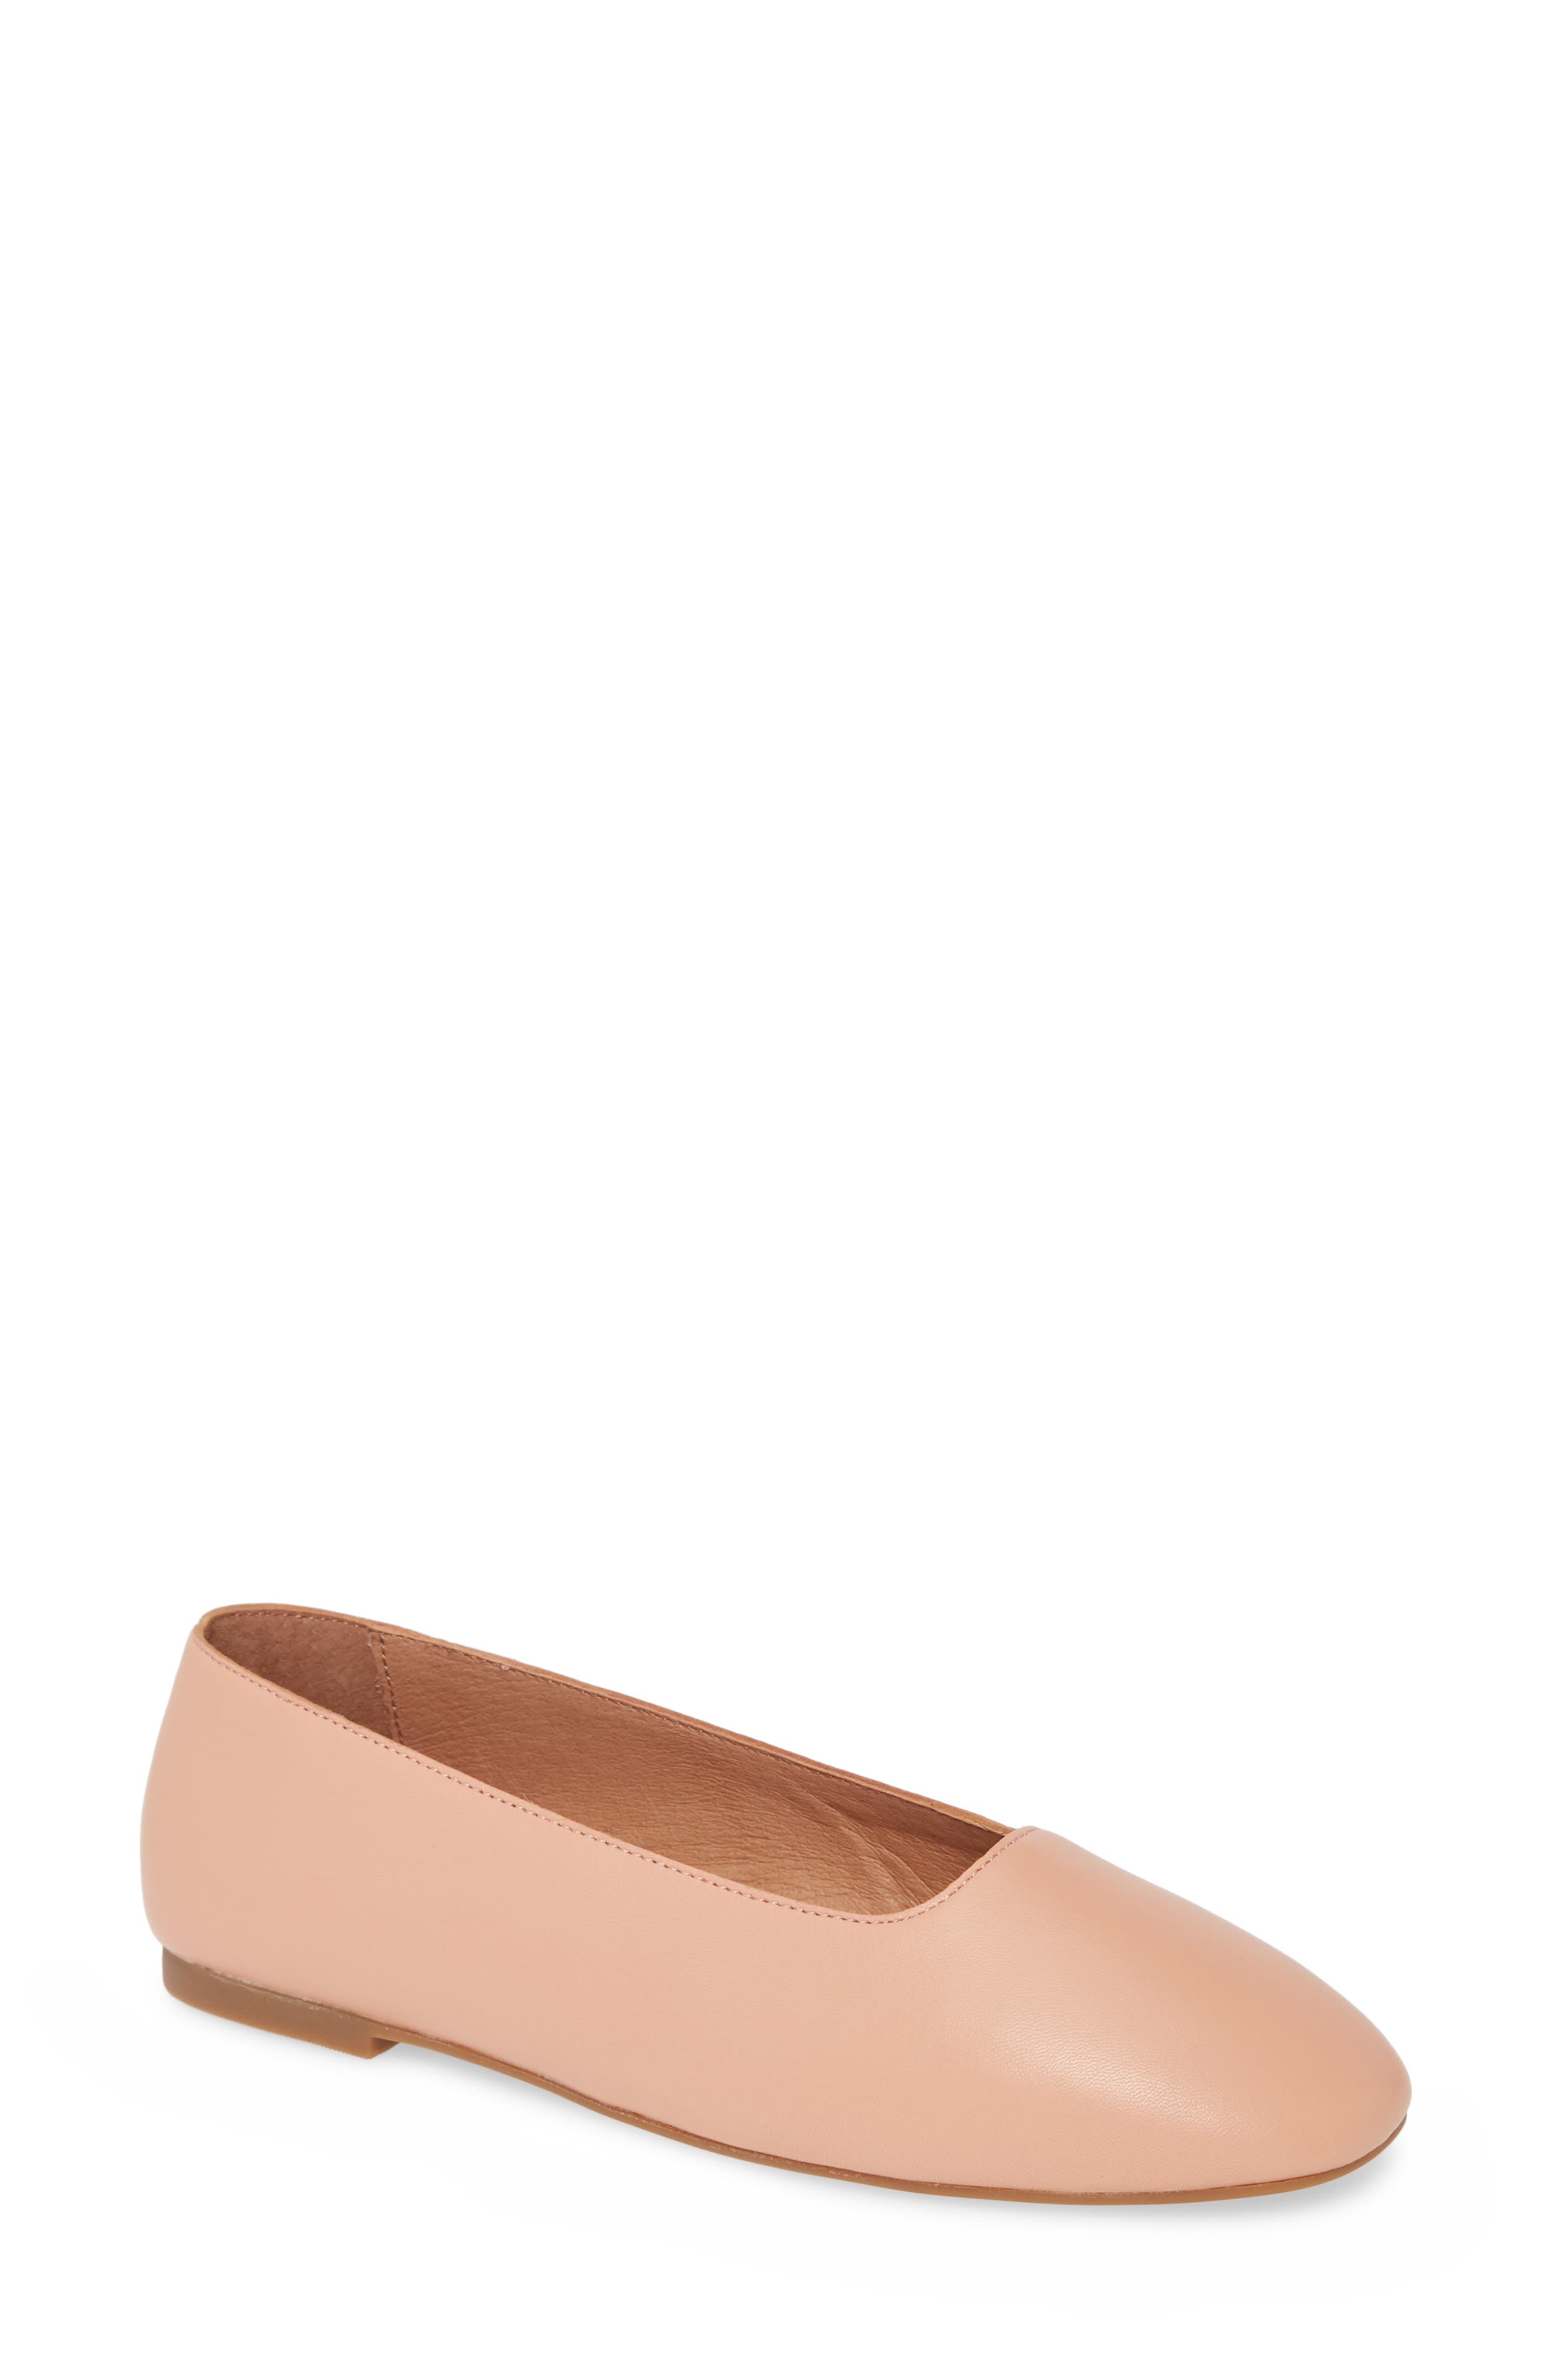 Women's Flats Madewell Shoes | Nordstrom